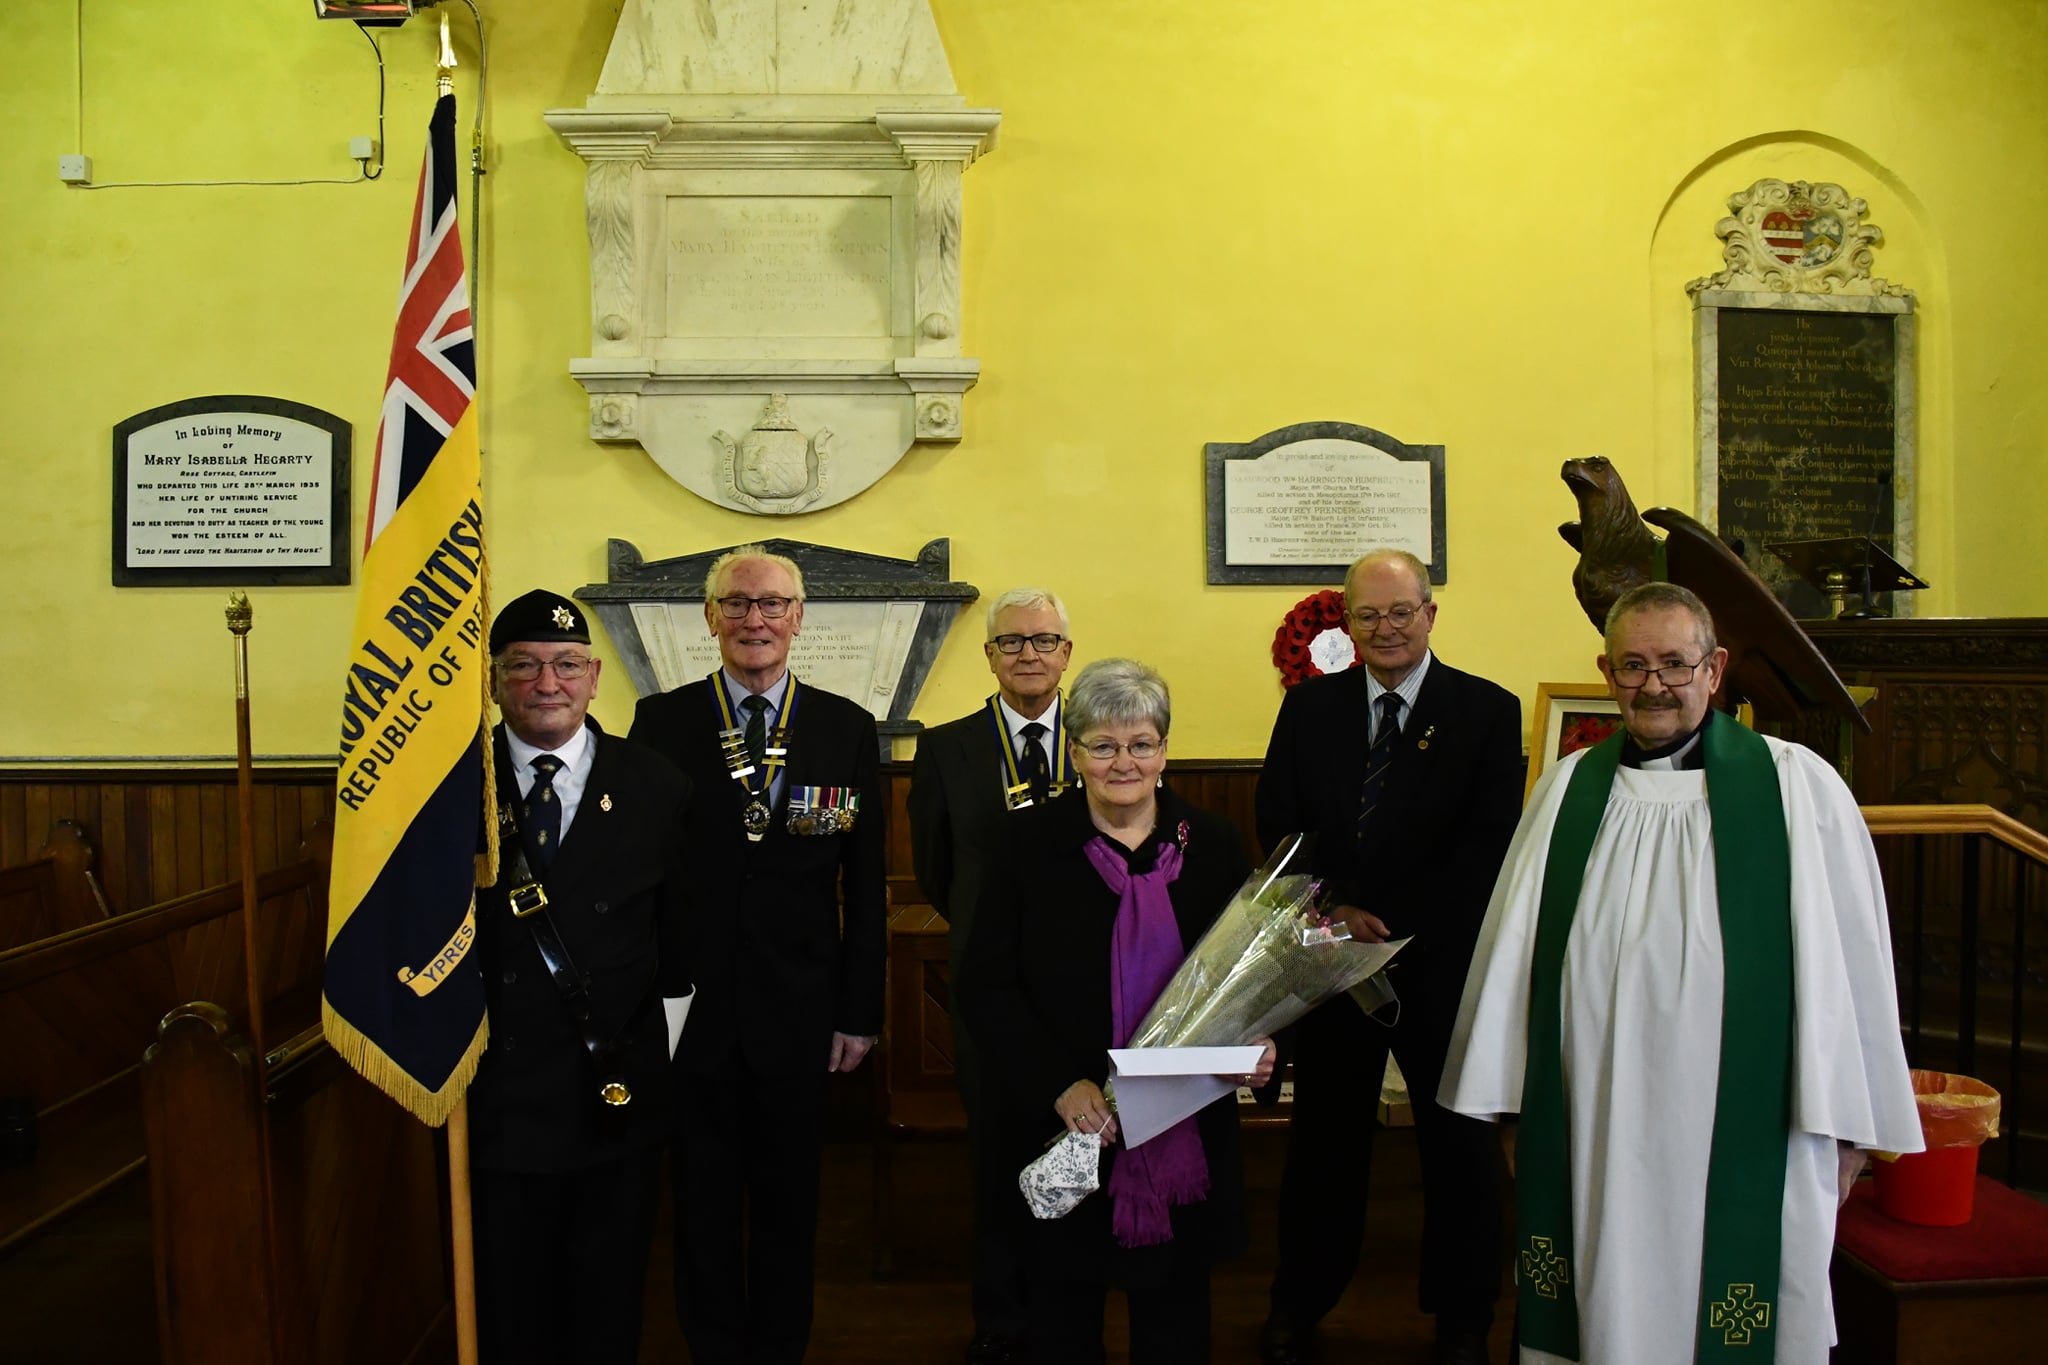 Mrs Pearl Barnett is is presented with the Irish Free State Salver by Lt. Col. Ken Martin, President of Royal British Legion Republic of Ireland. Also included is Brian Crawford, the Legion's Poppy Appeal Organiser in the Republic.